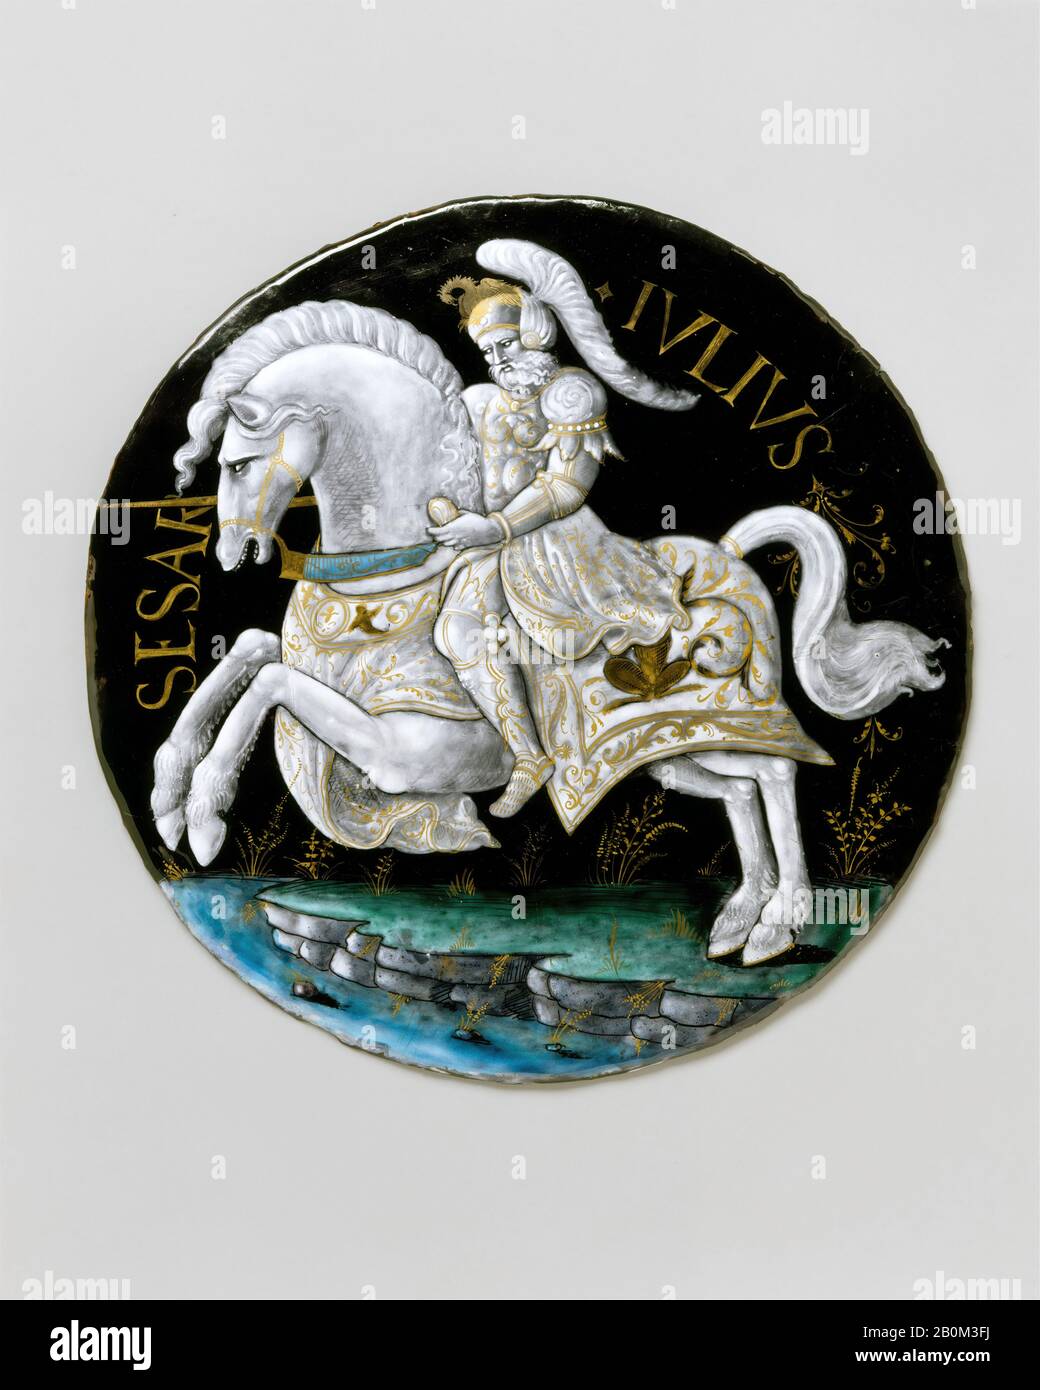 Workshop of Colin Nouailher, Julius Caesar, French, Limoges, Workshop of Colin Nouailher (French, active 1539, d. after 1571), probably ca. 1541, French, Limoges, Painted enamel on copper, partly gilt, Diameter (without frame): 9 1/2 in. (24.1 cm), Diameter (with frame): 14 7/8 in. (37.8 cm), Enamels-Painted Stock Photo